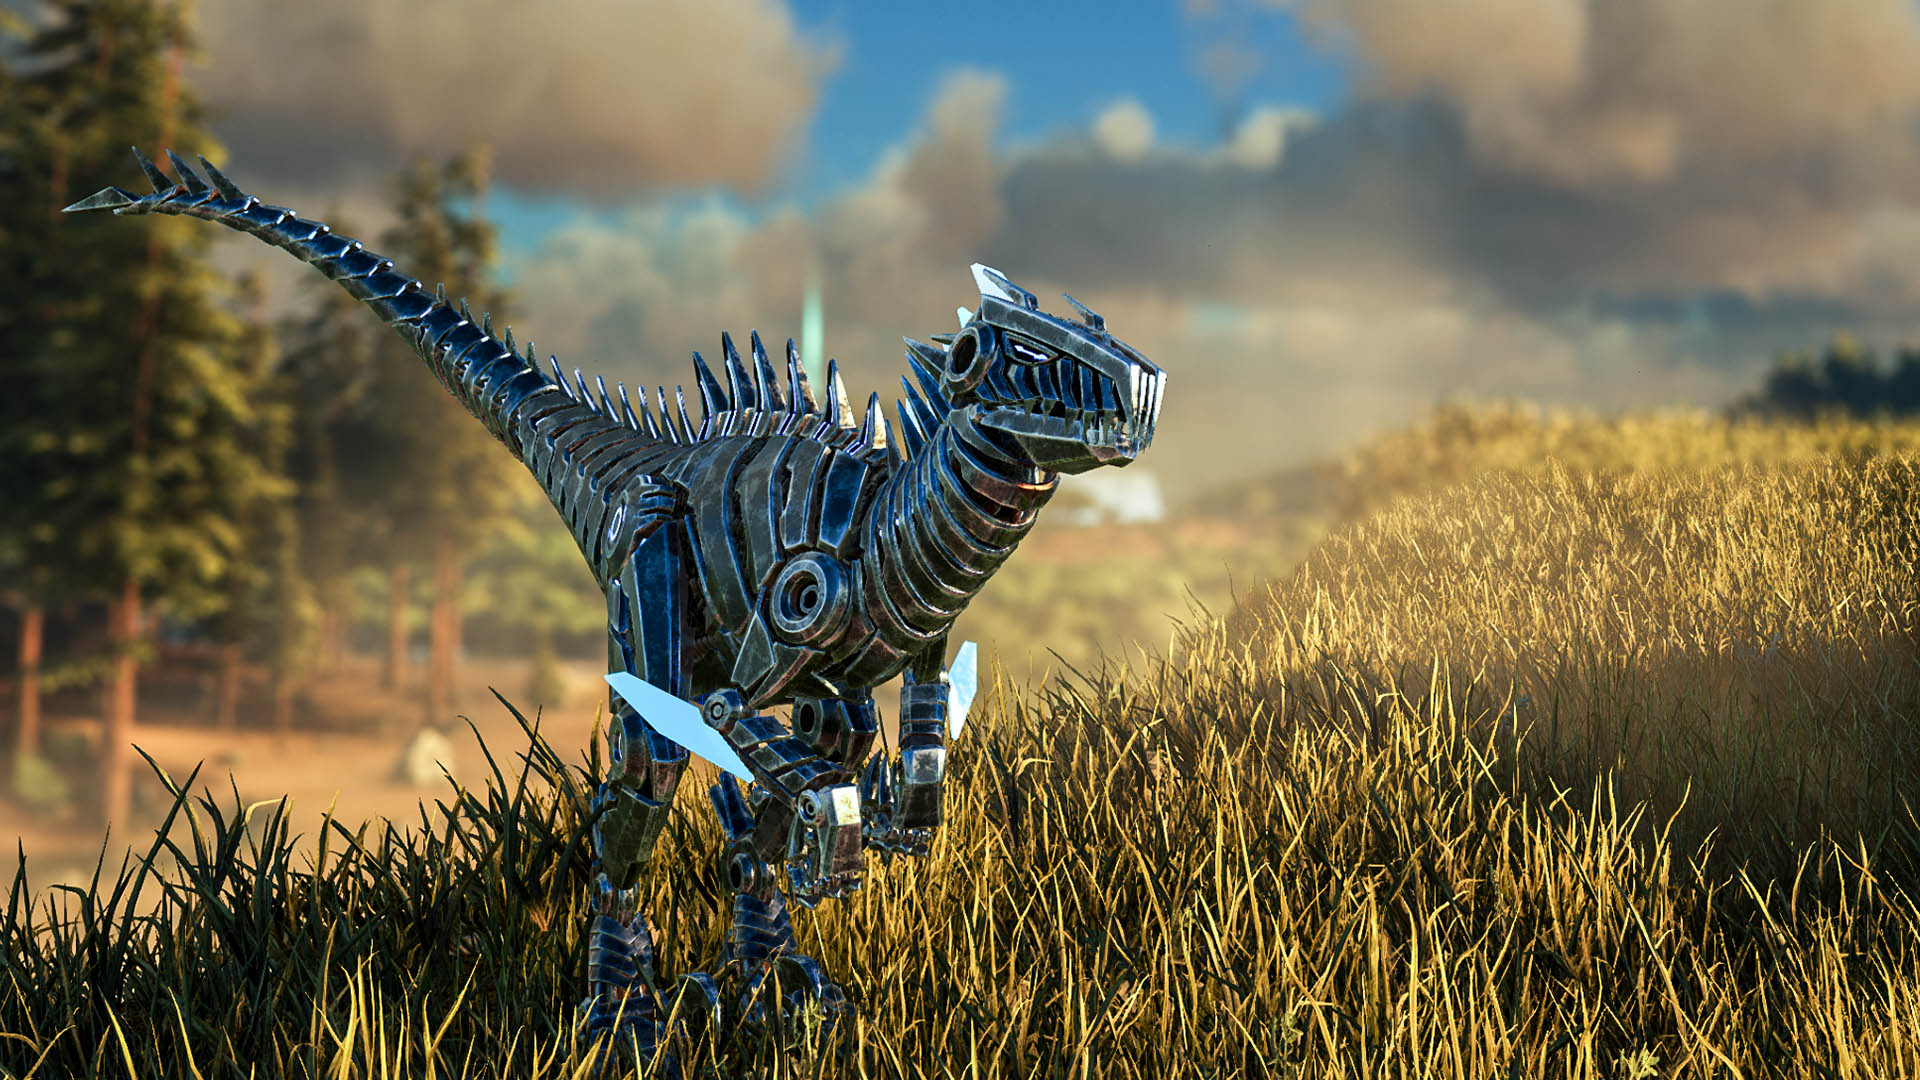 ARK Survival Evolved Bionic Mosasaurus Skin on PS4 Official